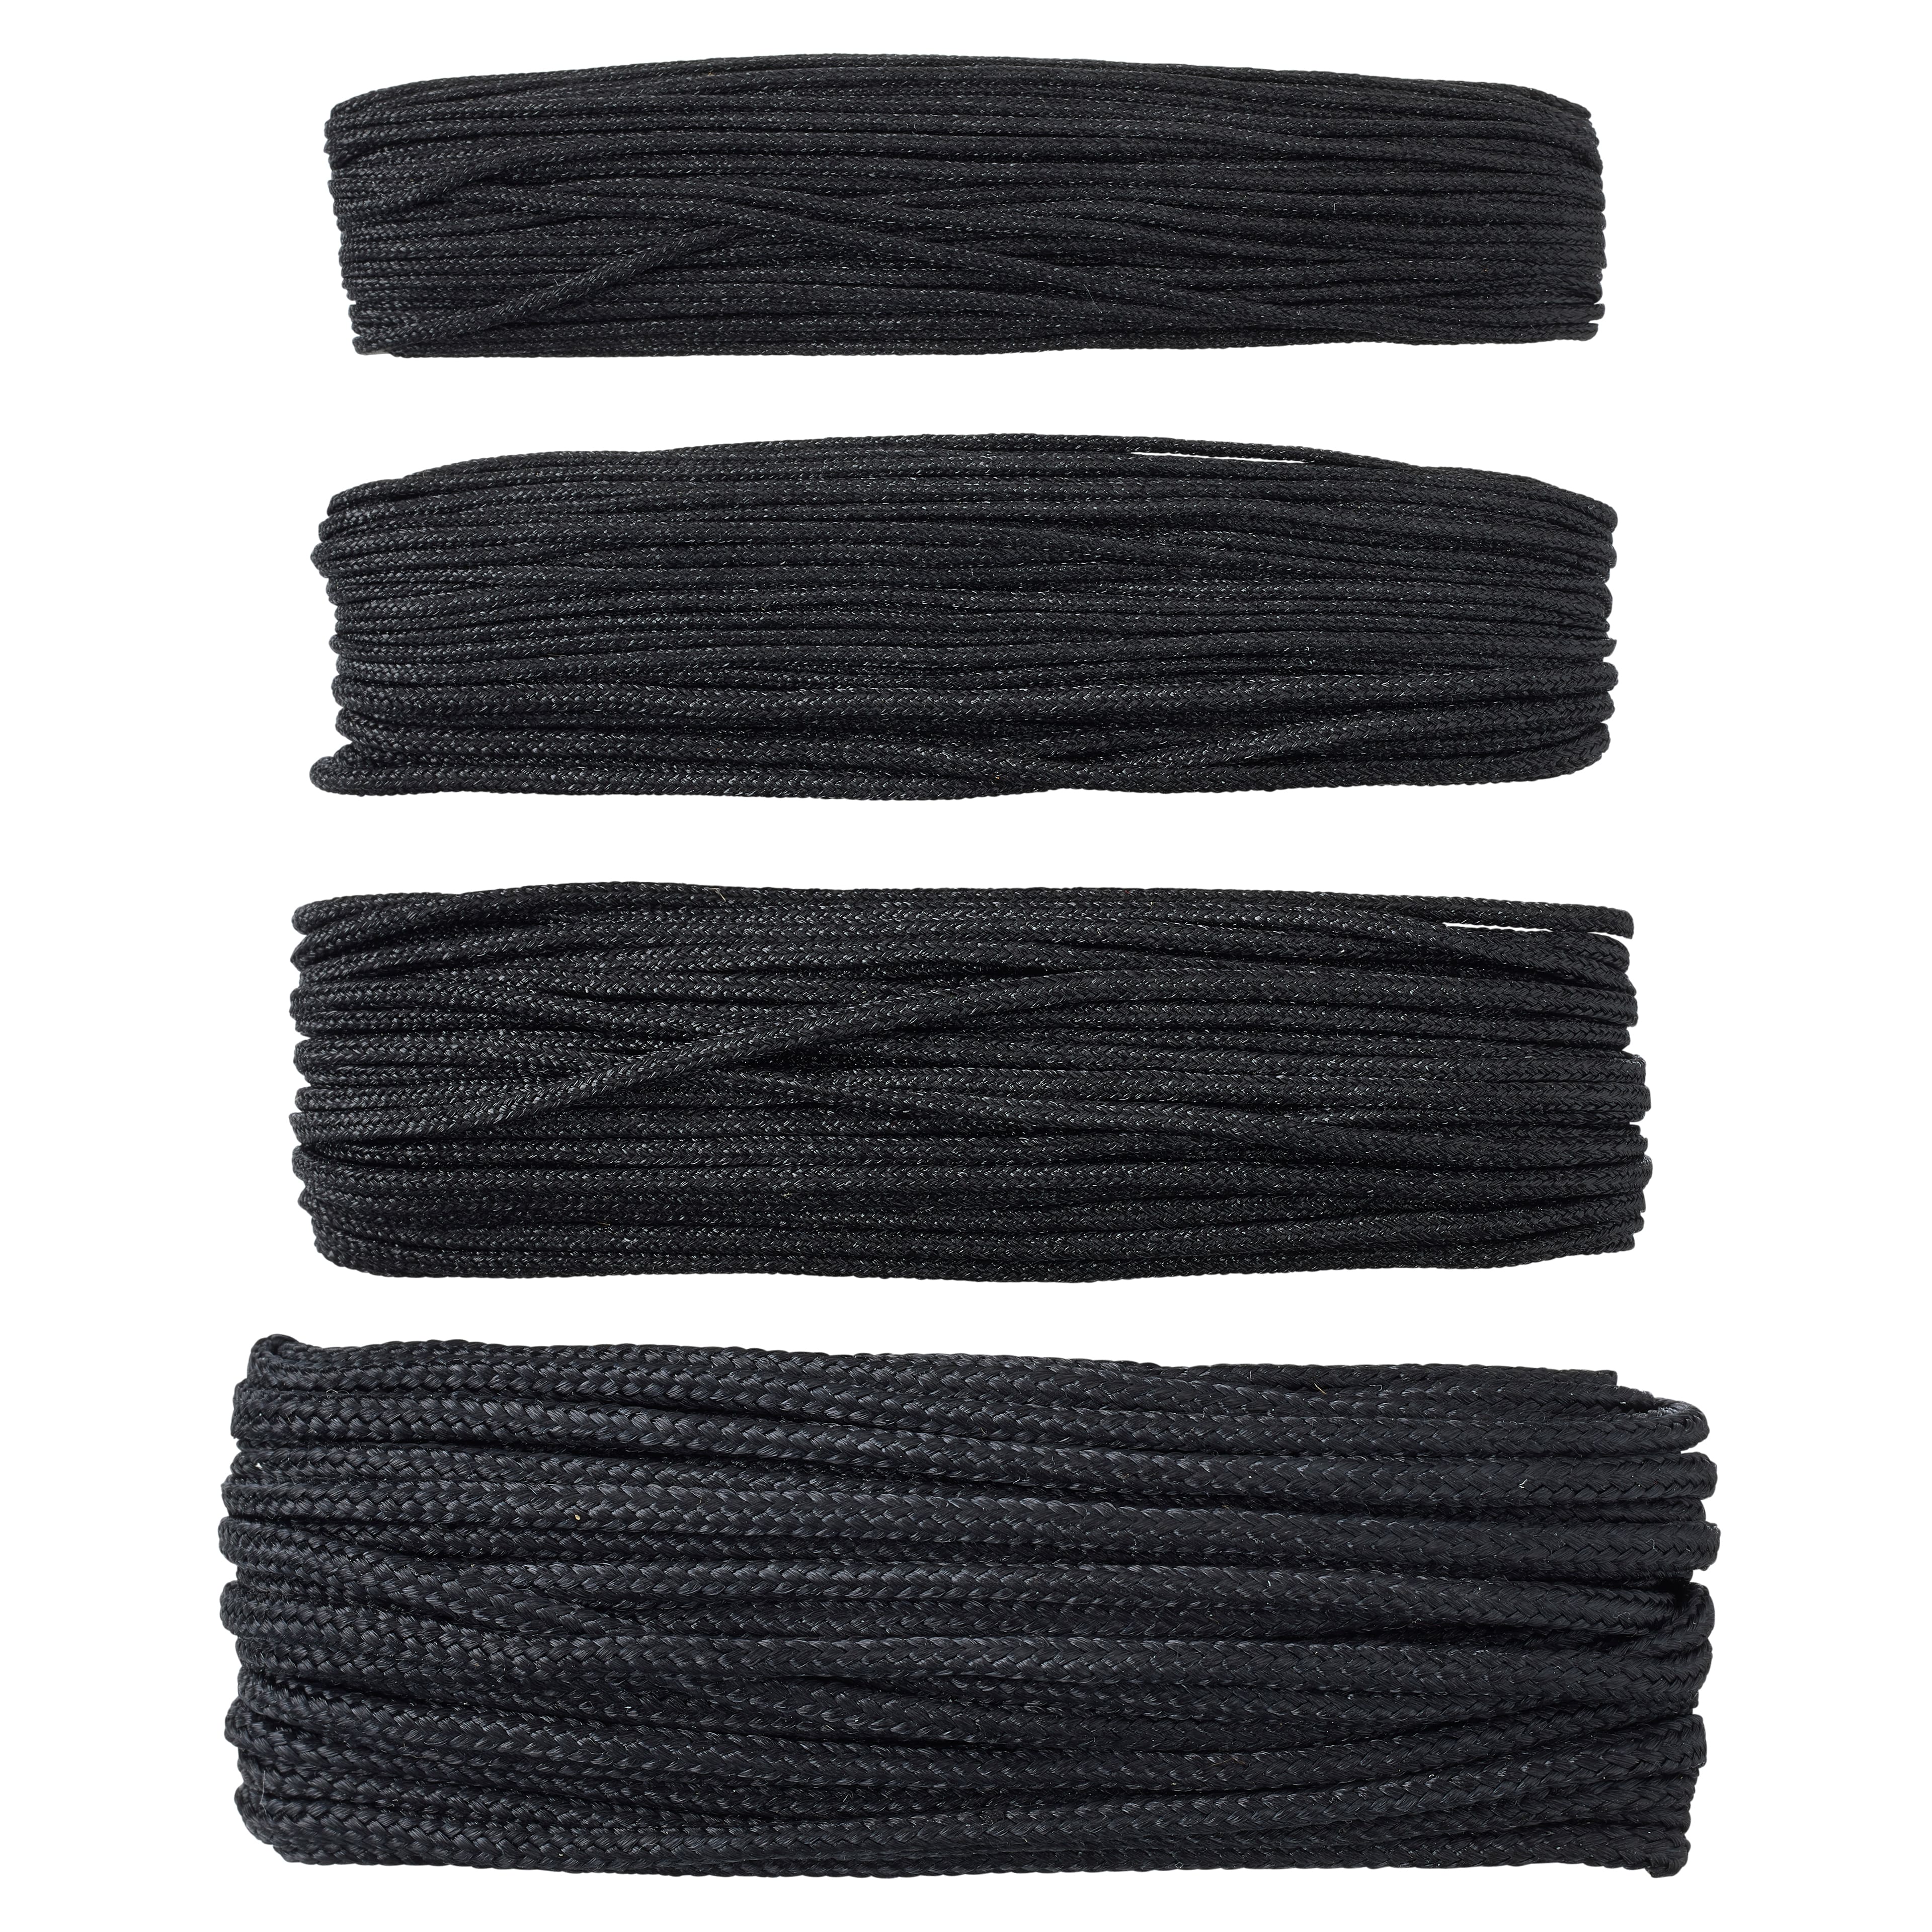 Accessories Thin Nylon Cord Black, $3.56, Afterpay